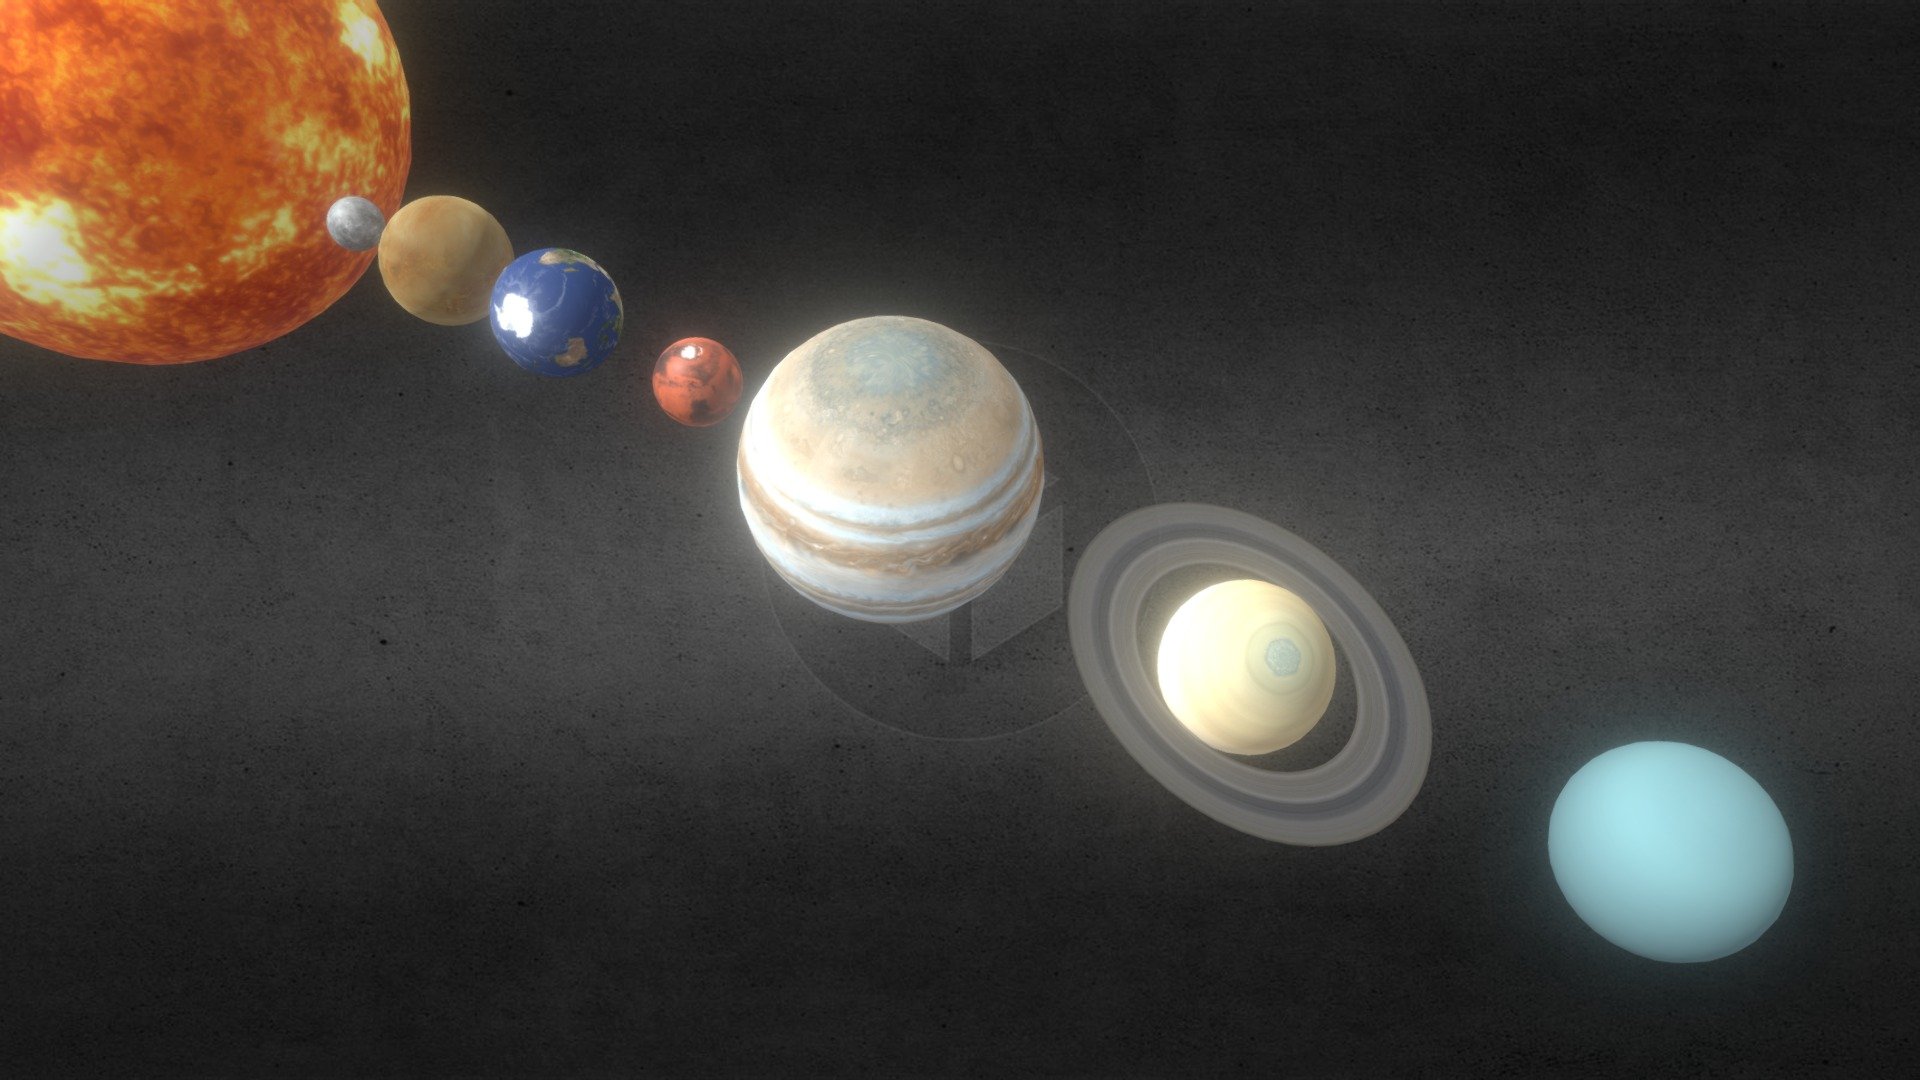 8K - Solar System - All Planets - Photorealistic